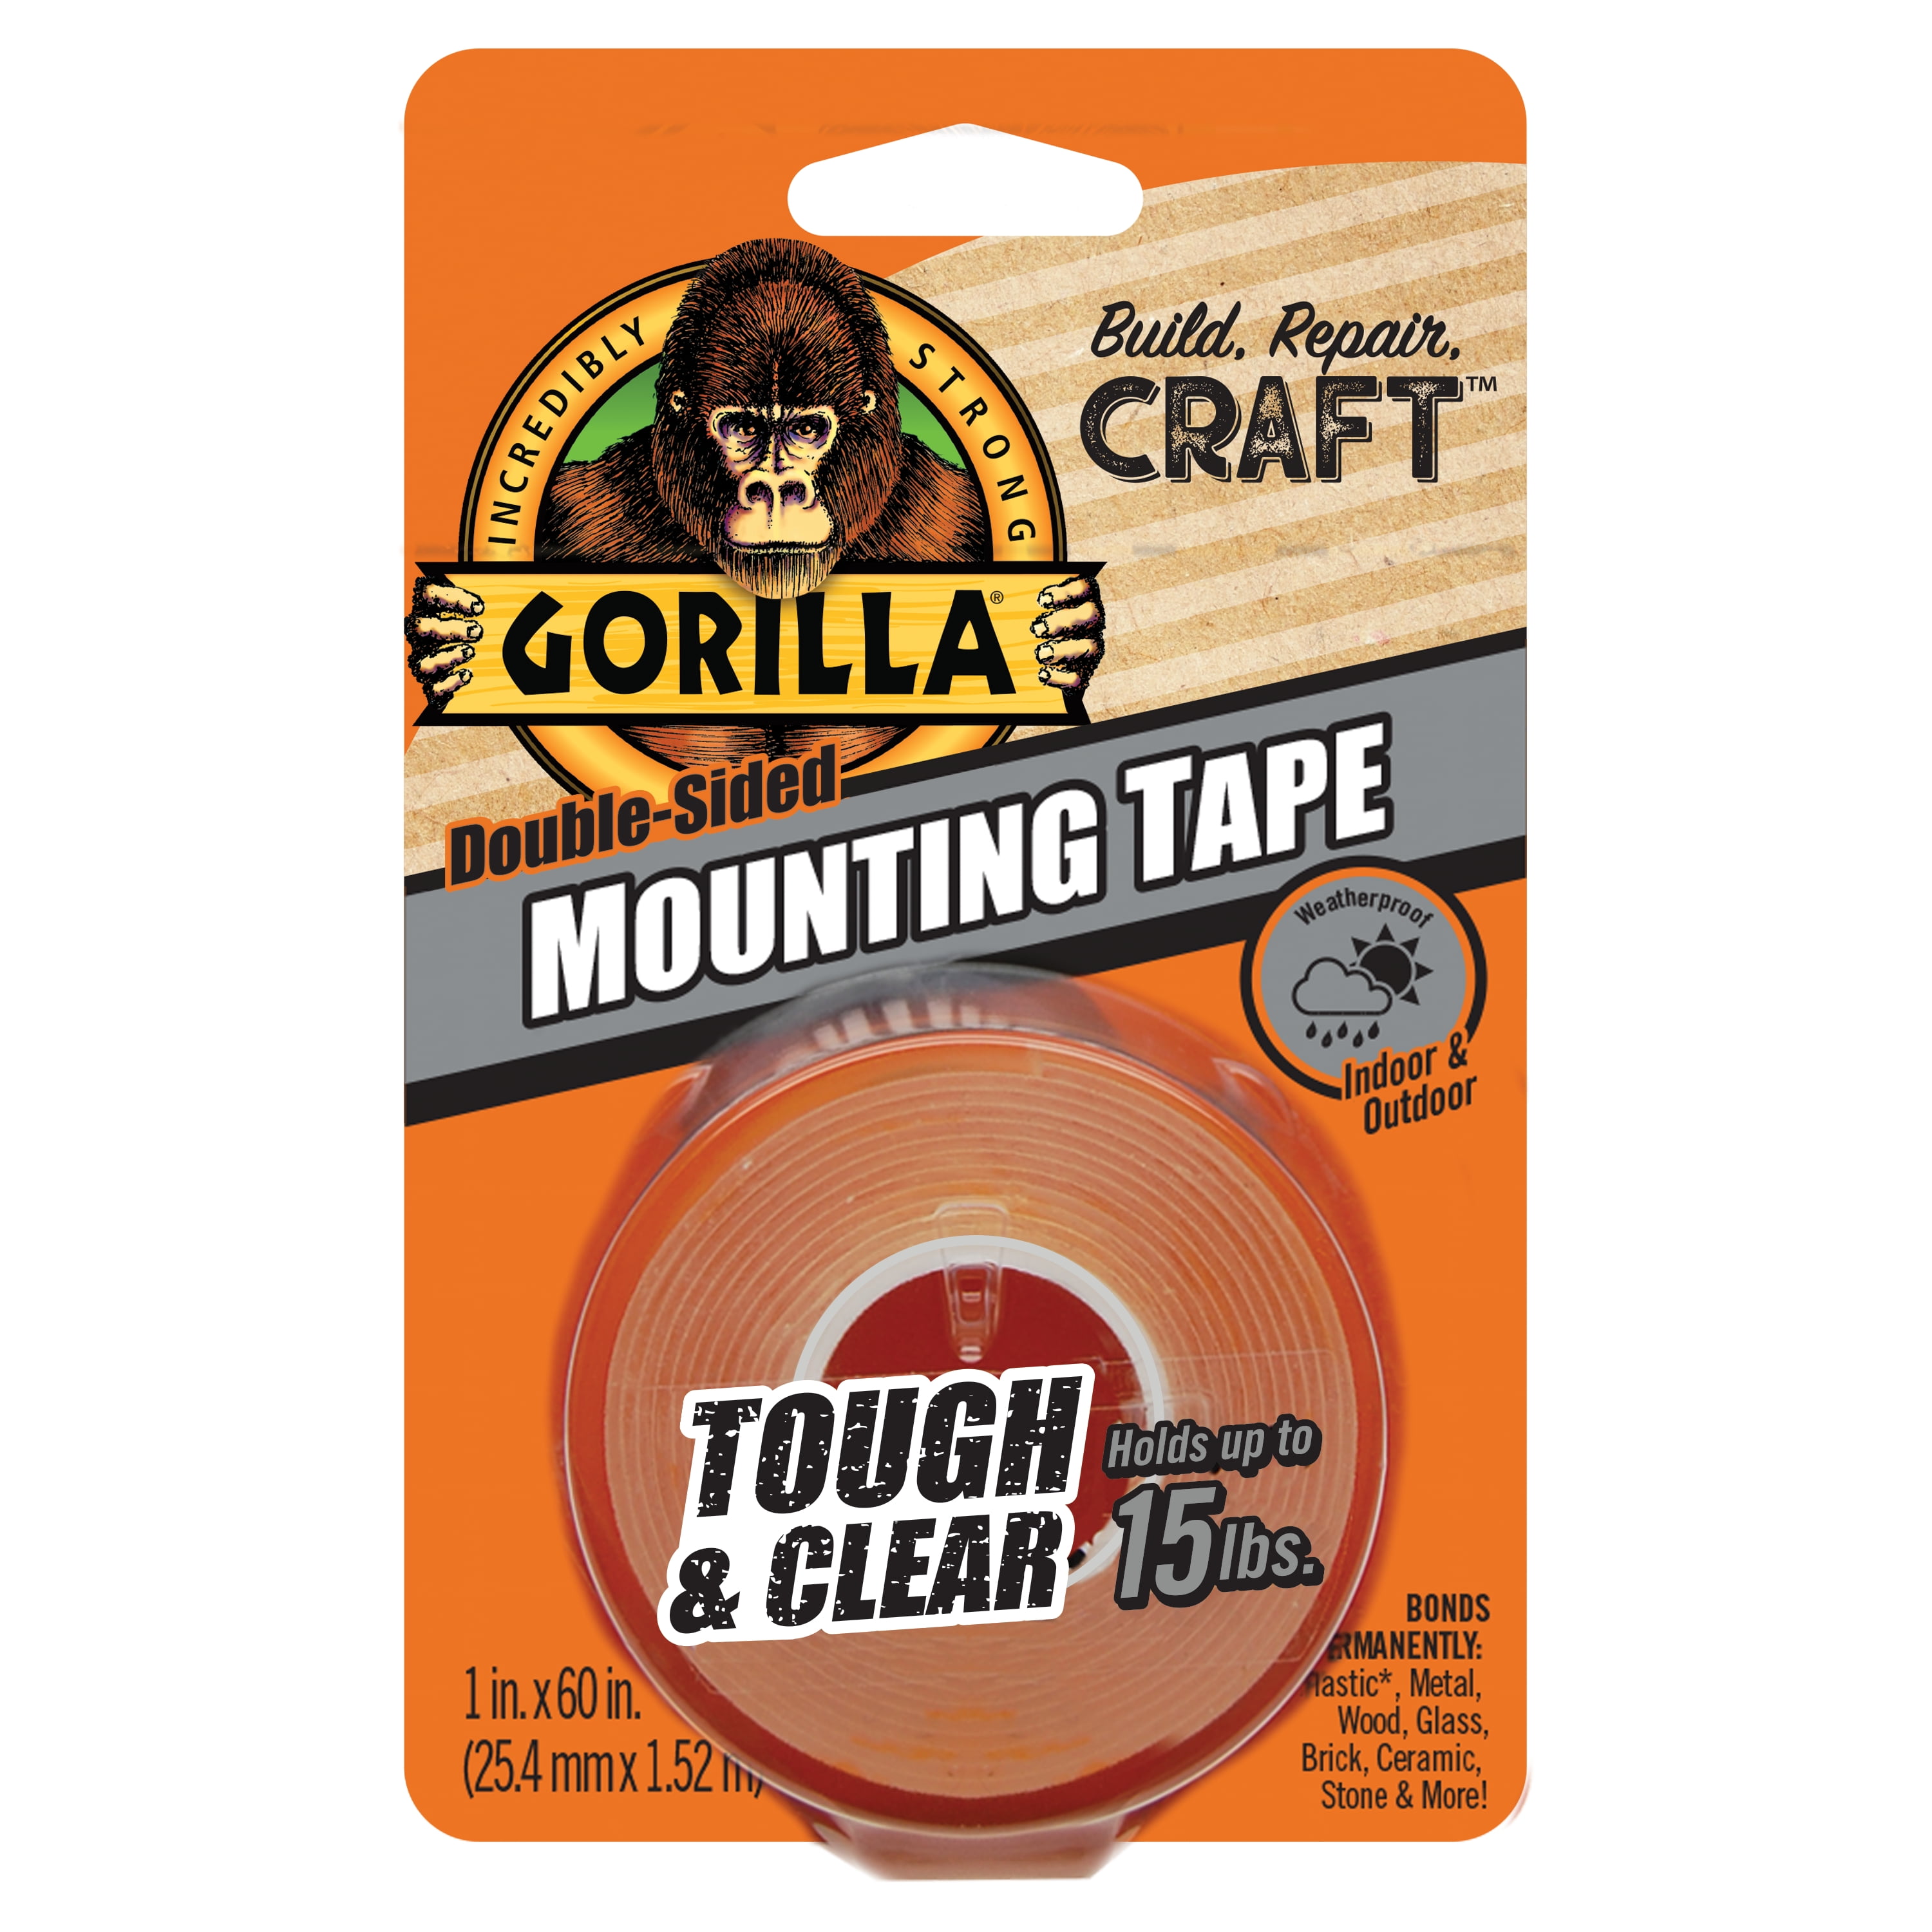 Heavy Duty 1'' x 50'' 1 ea Pack of 6 Scotch Indoor Mounting Tape